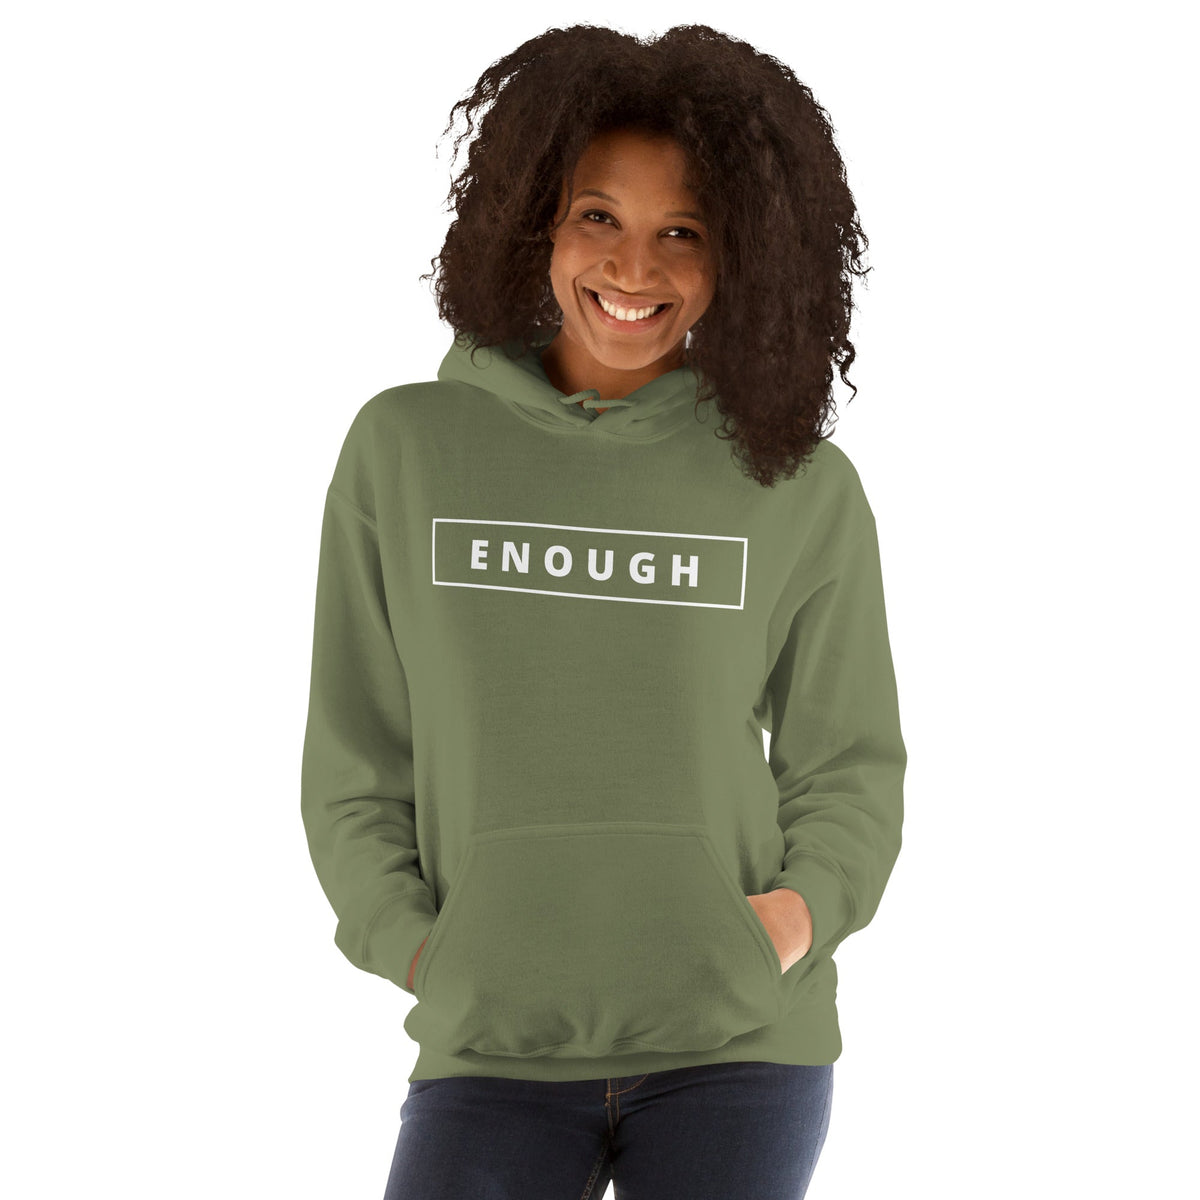 ENOUGH - Motivational Inspirational Women's Hoodie | I Am Enough Collection